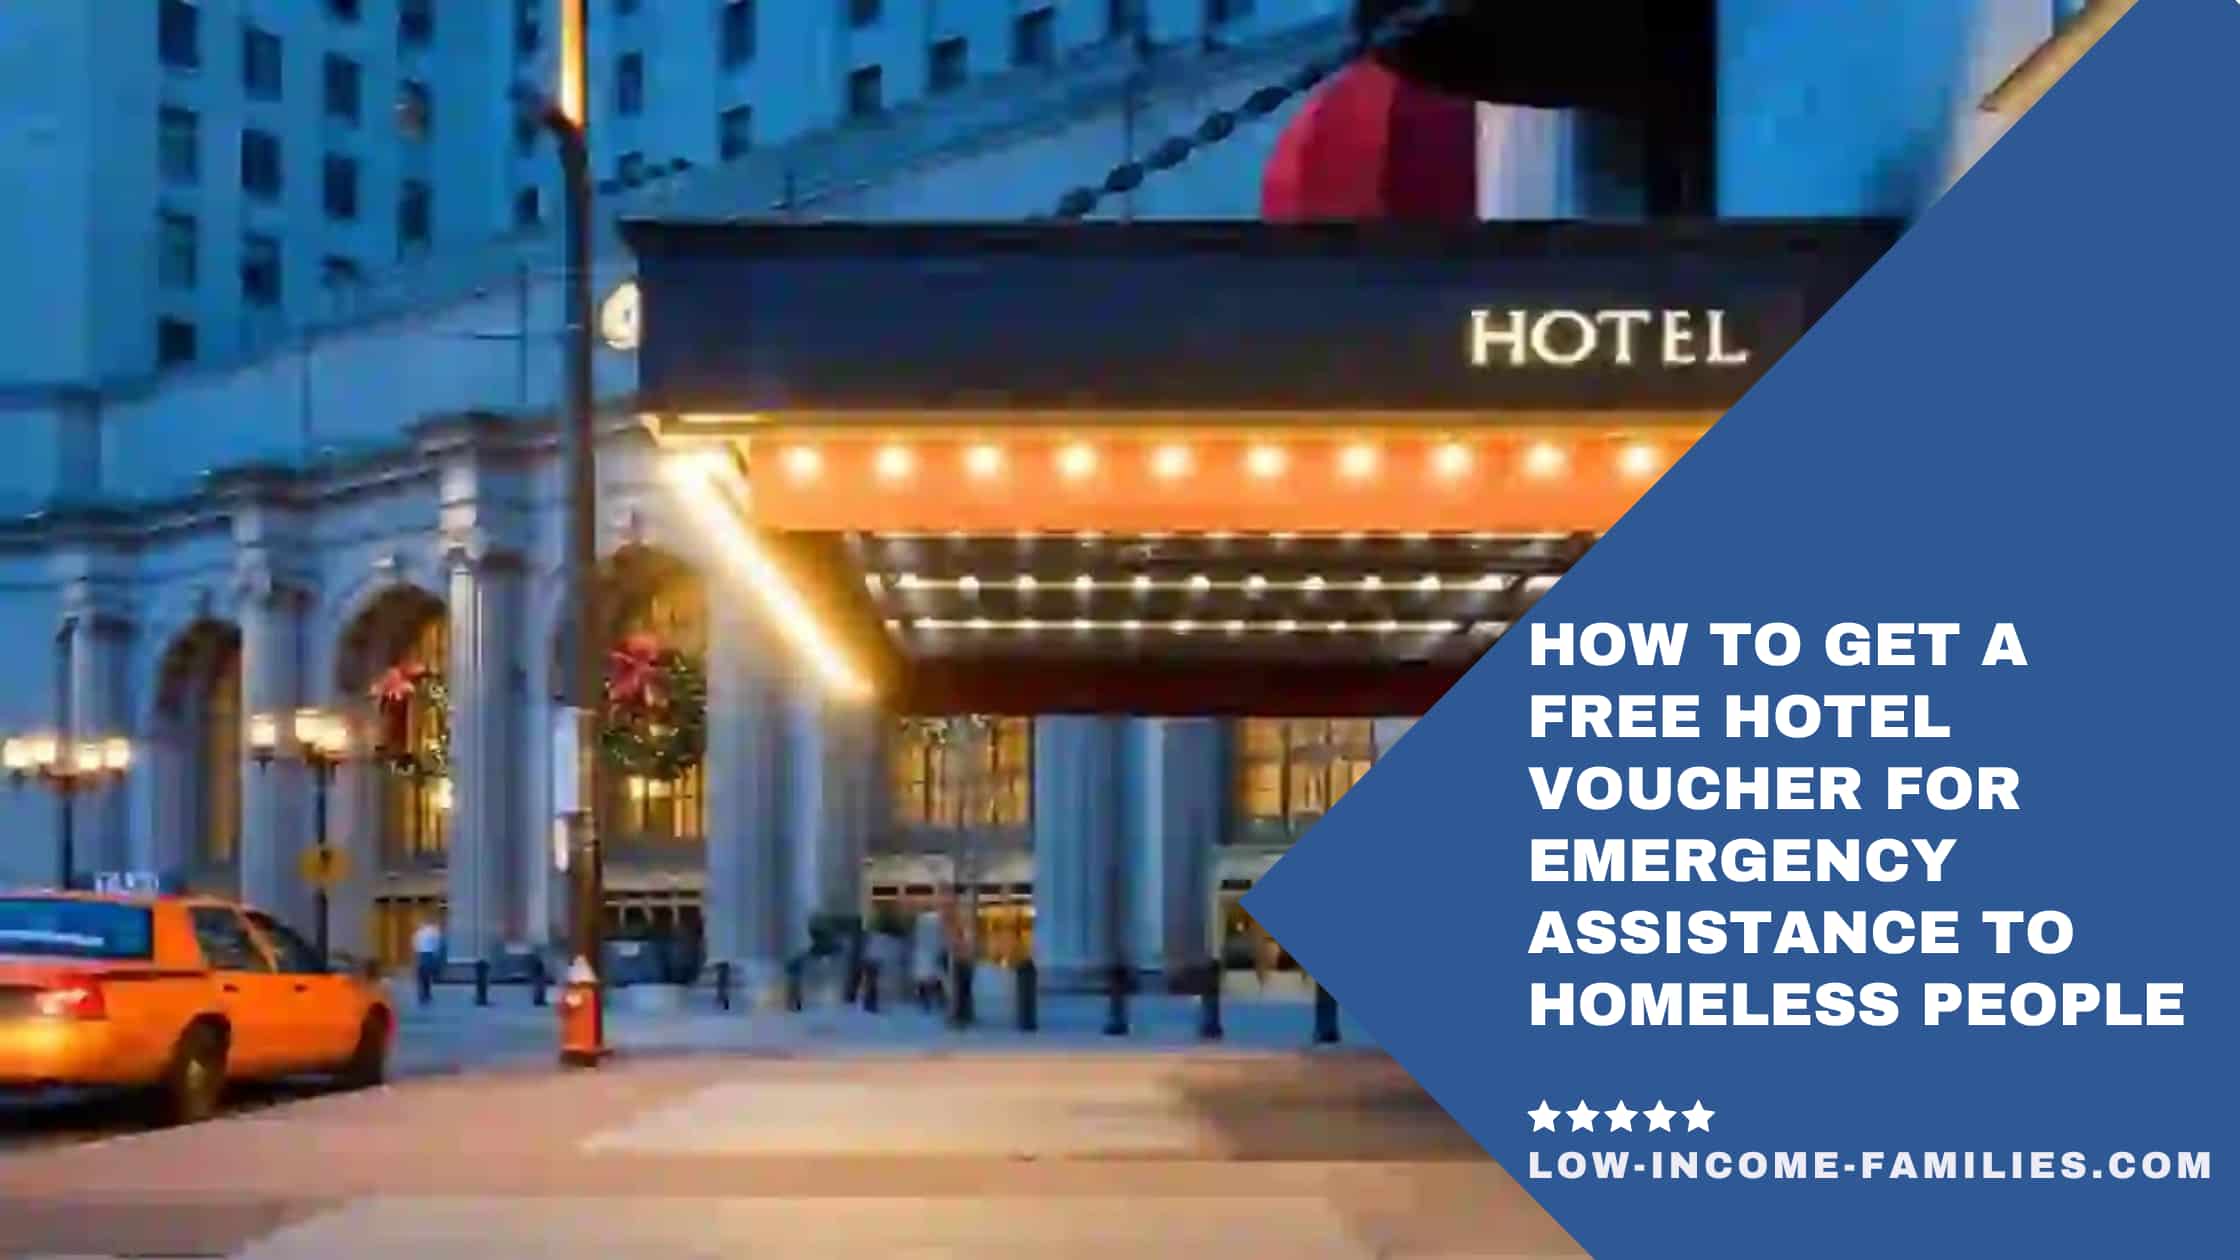 How to Get a Free Hotel Voucher for Emergency Assistance to Homeless People